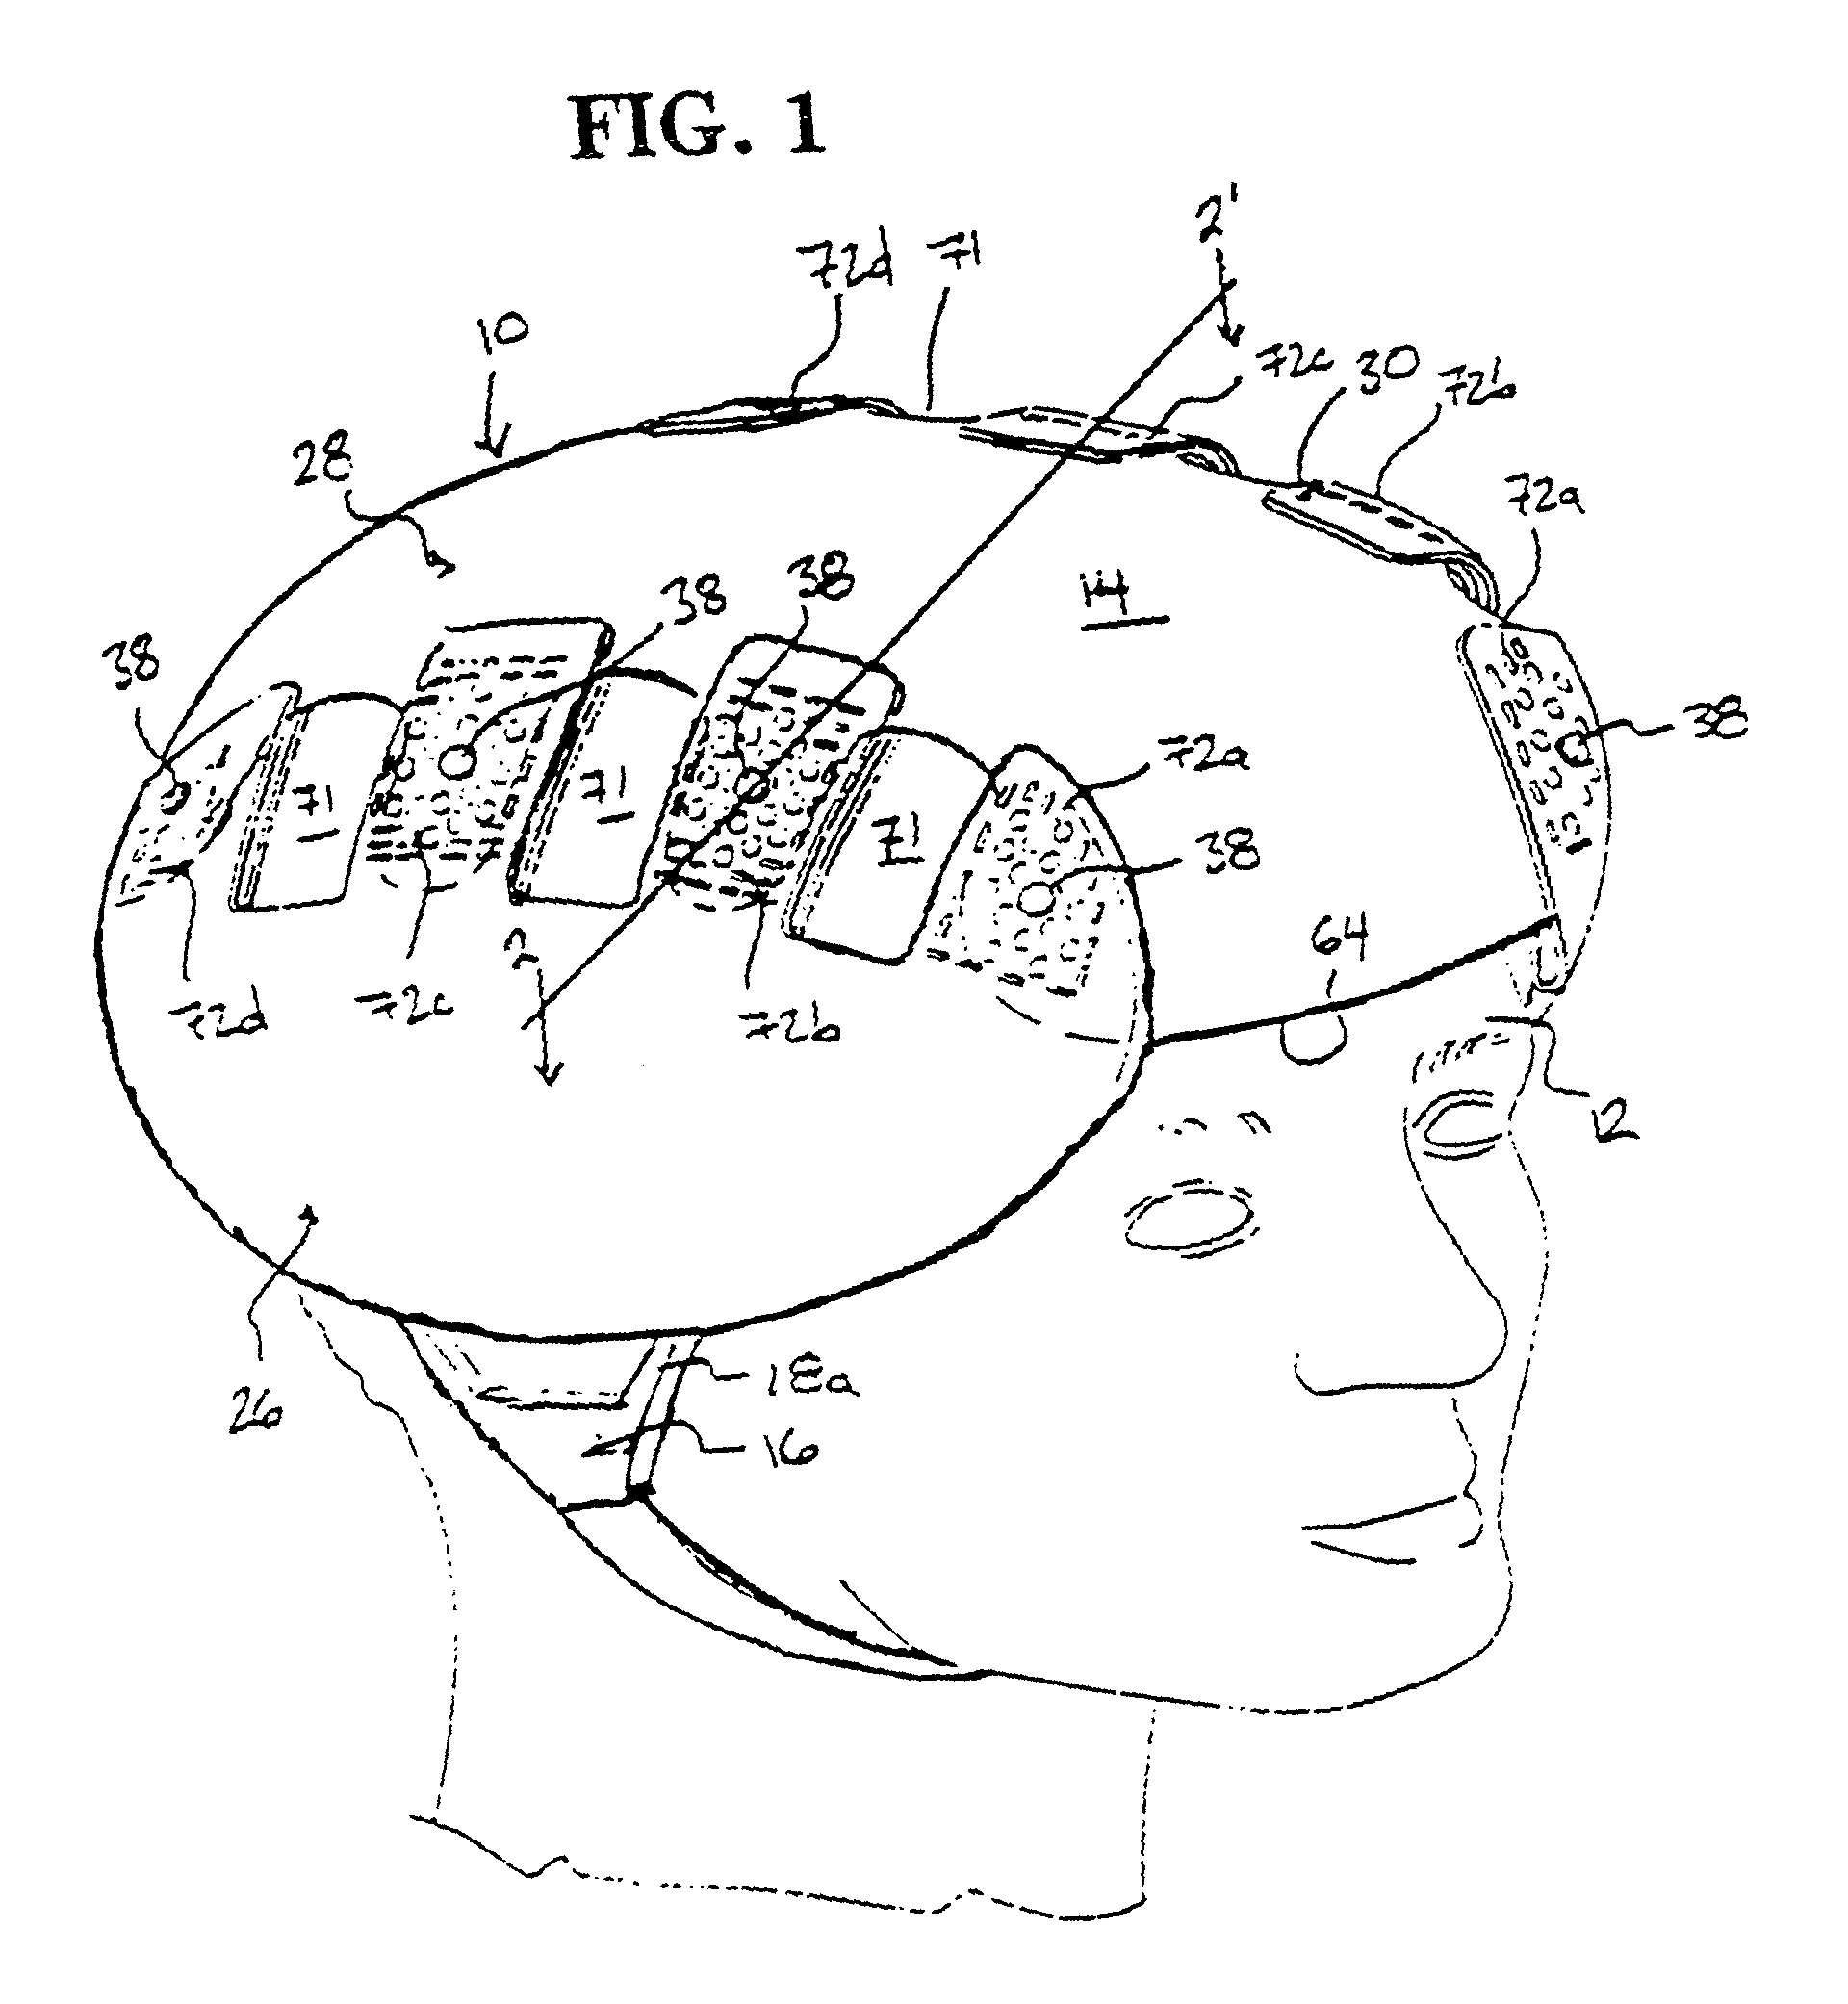 Protective head covering having impact absorbing crumple or shear zone